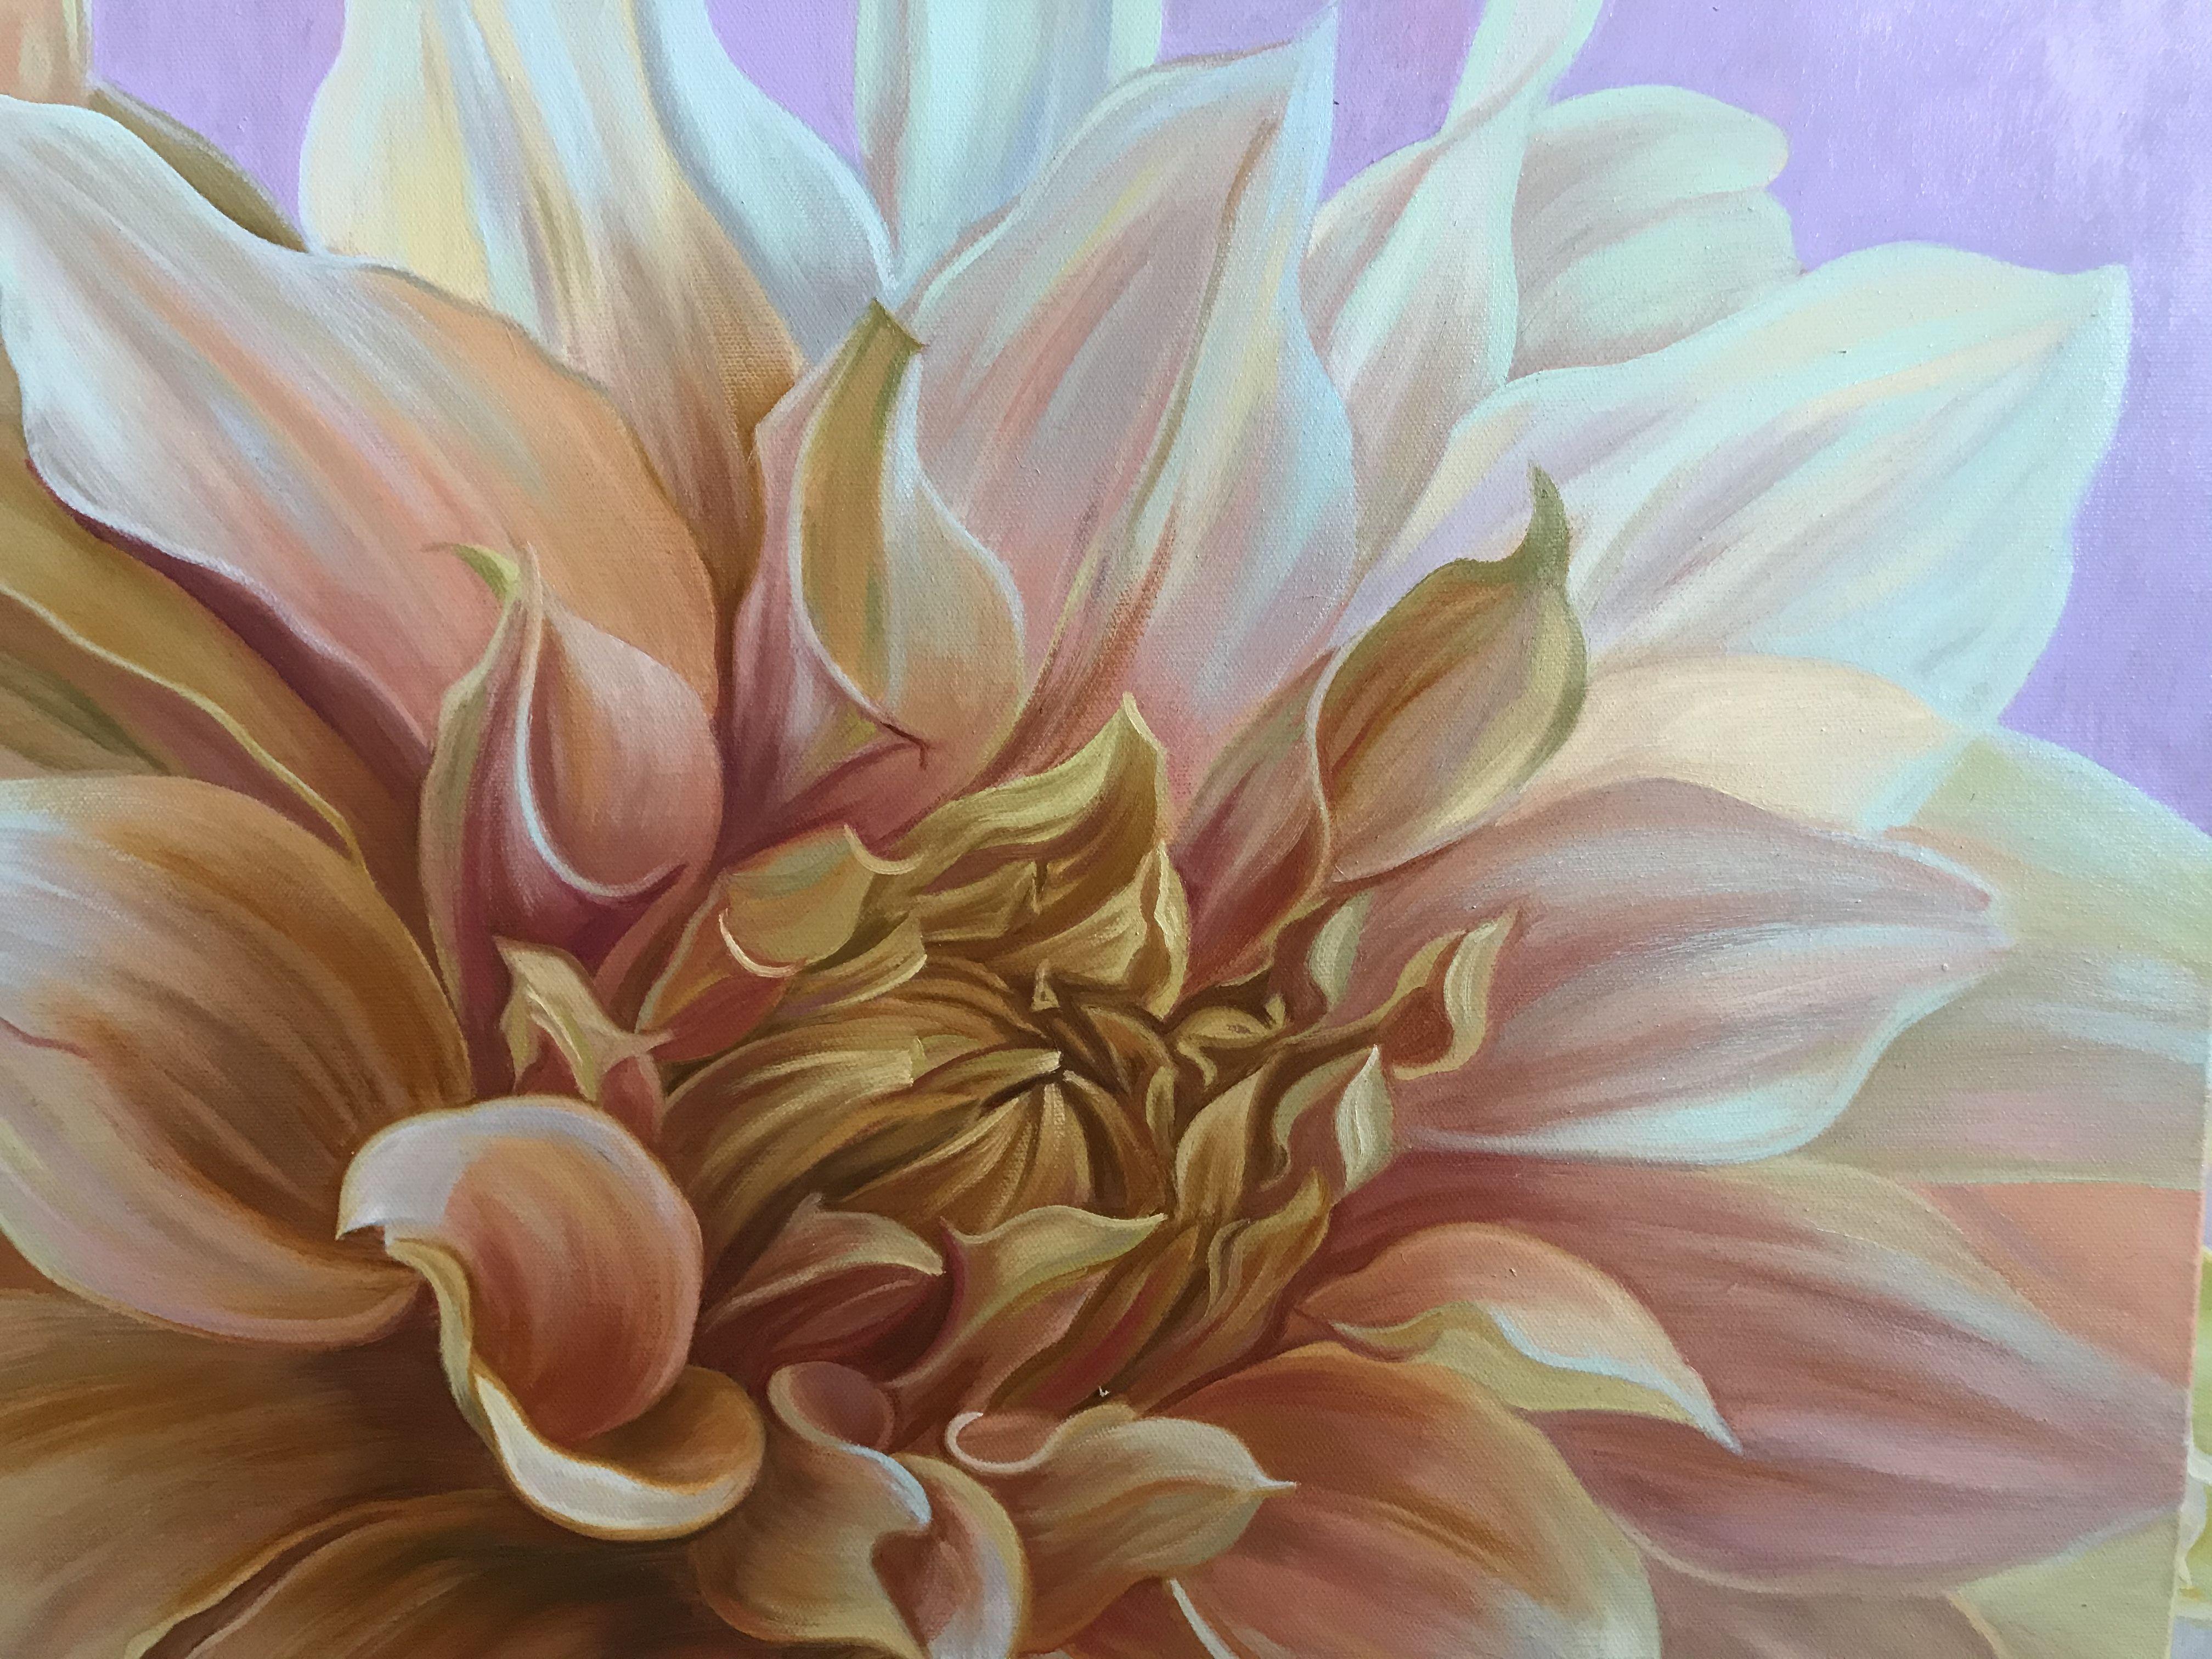 Dahlias cafe o light. Seeing dahlias in coffee beige color, I just fell in love with this color. I made the background in a soft lilac color that matches the tone of the flowers. This picture is perfect for any interior. Unfortunately, my camera